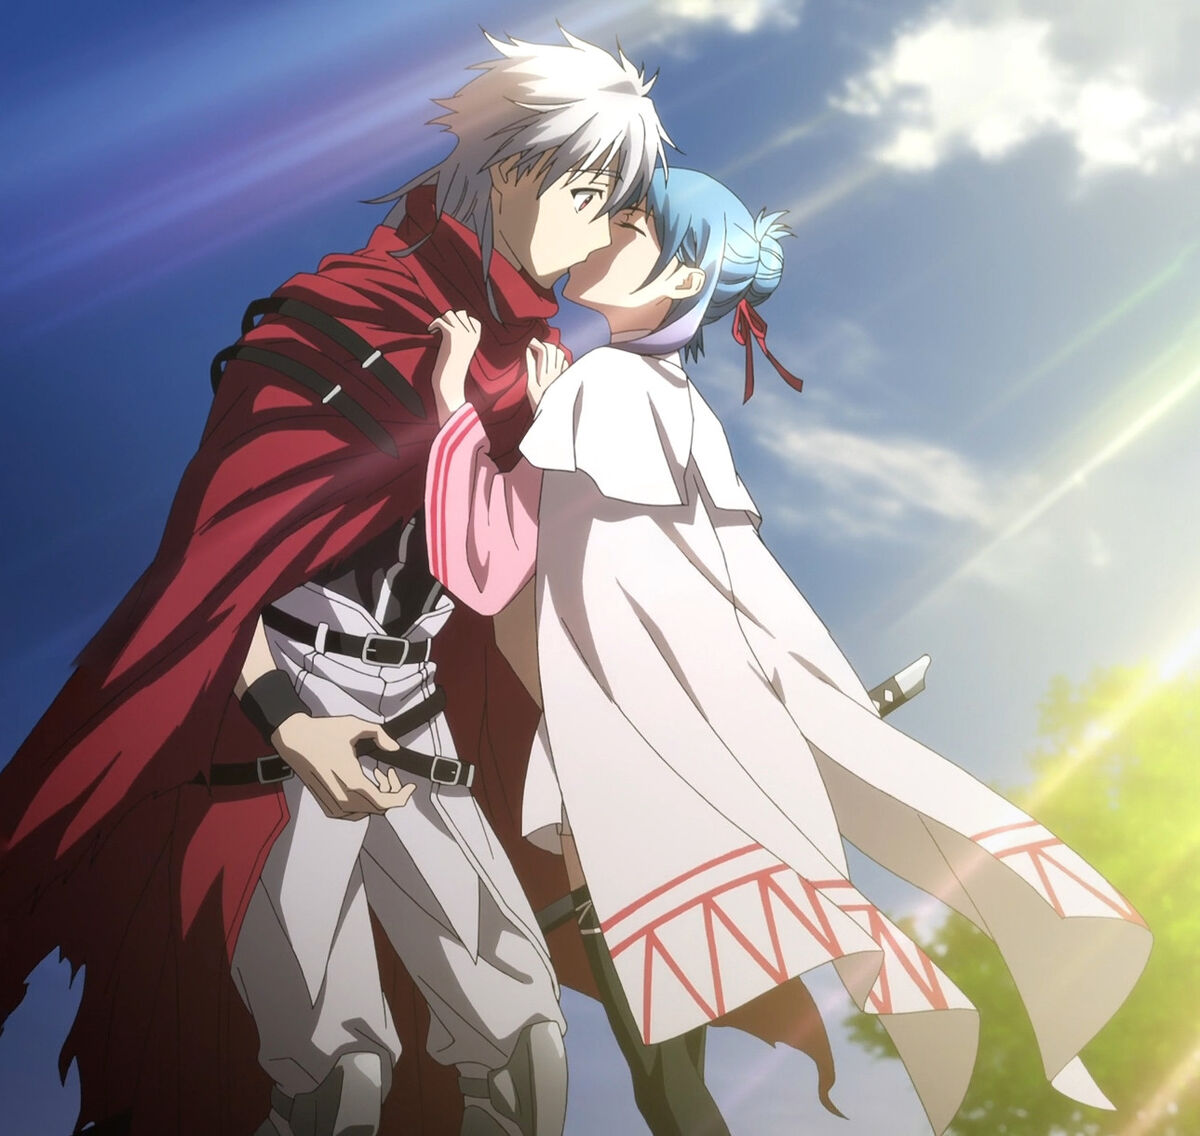 Plunderer - So cute Lynn and Pele! Upcoming anime: Koi to